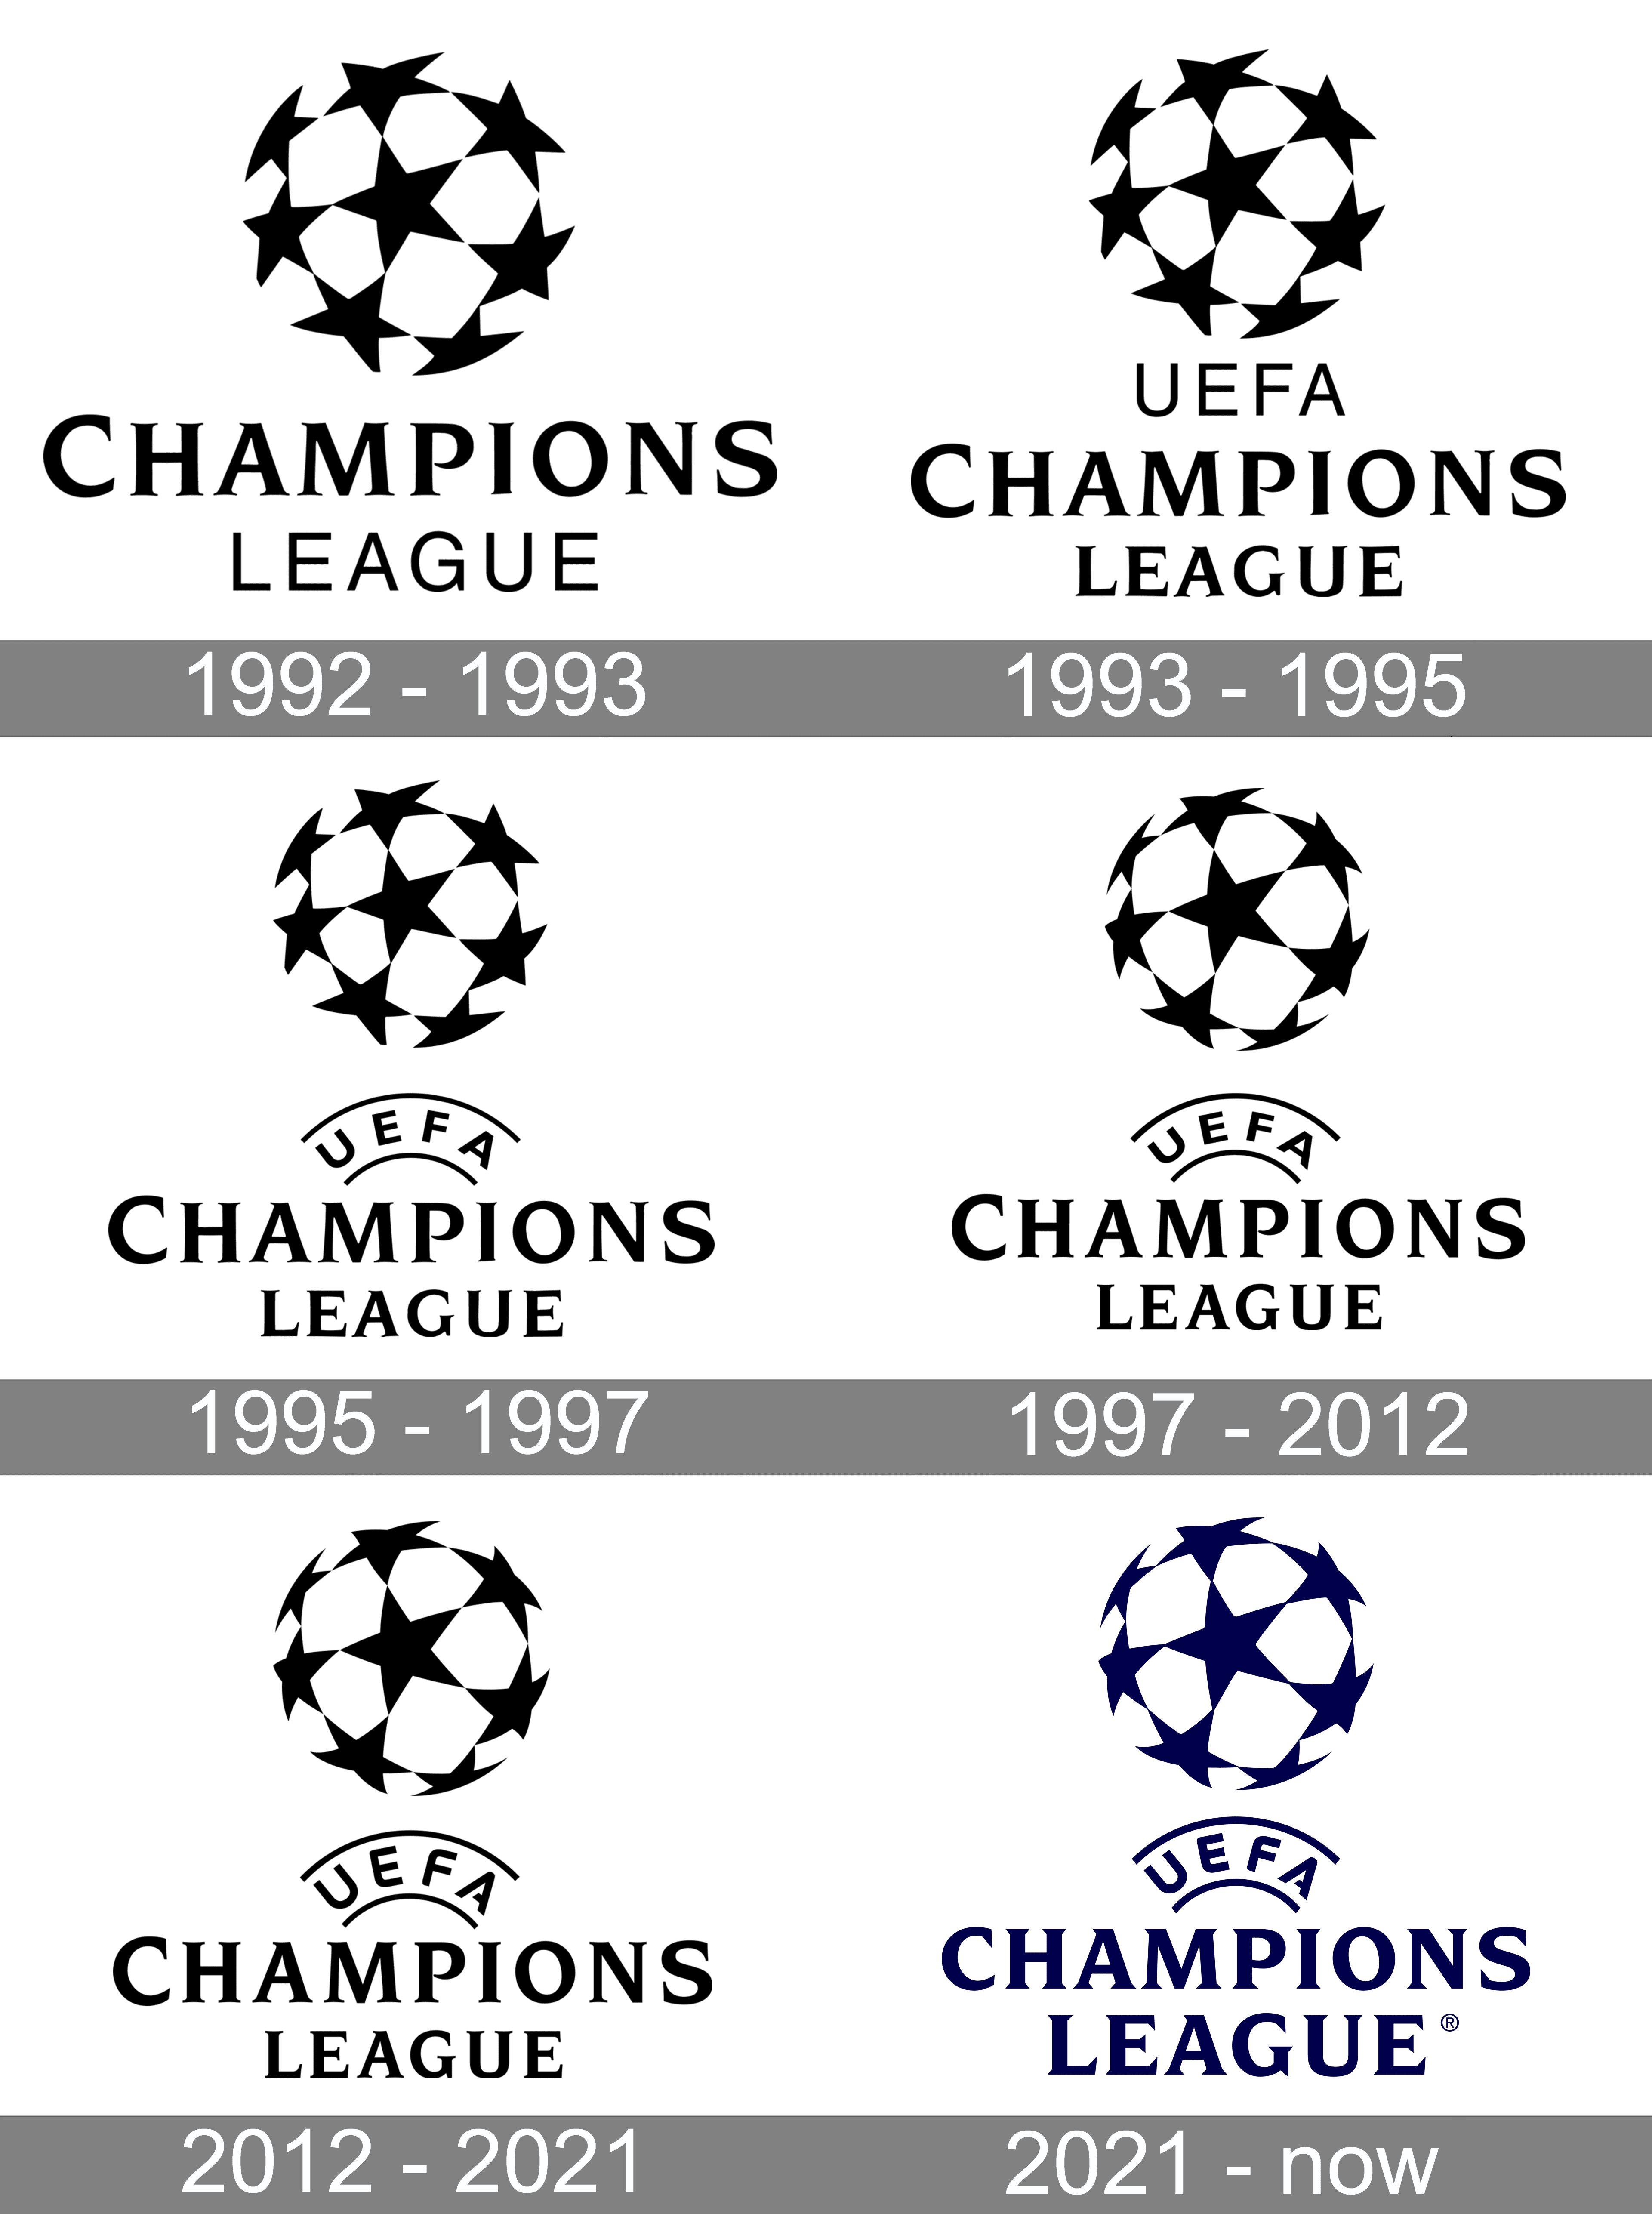 How To Draw The UEFA Champions League Logo vlr.eng.br